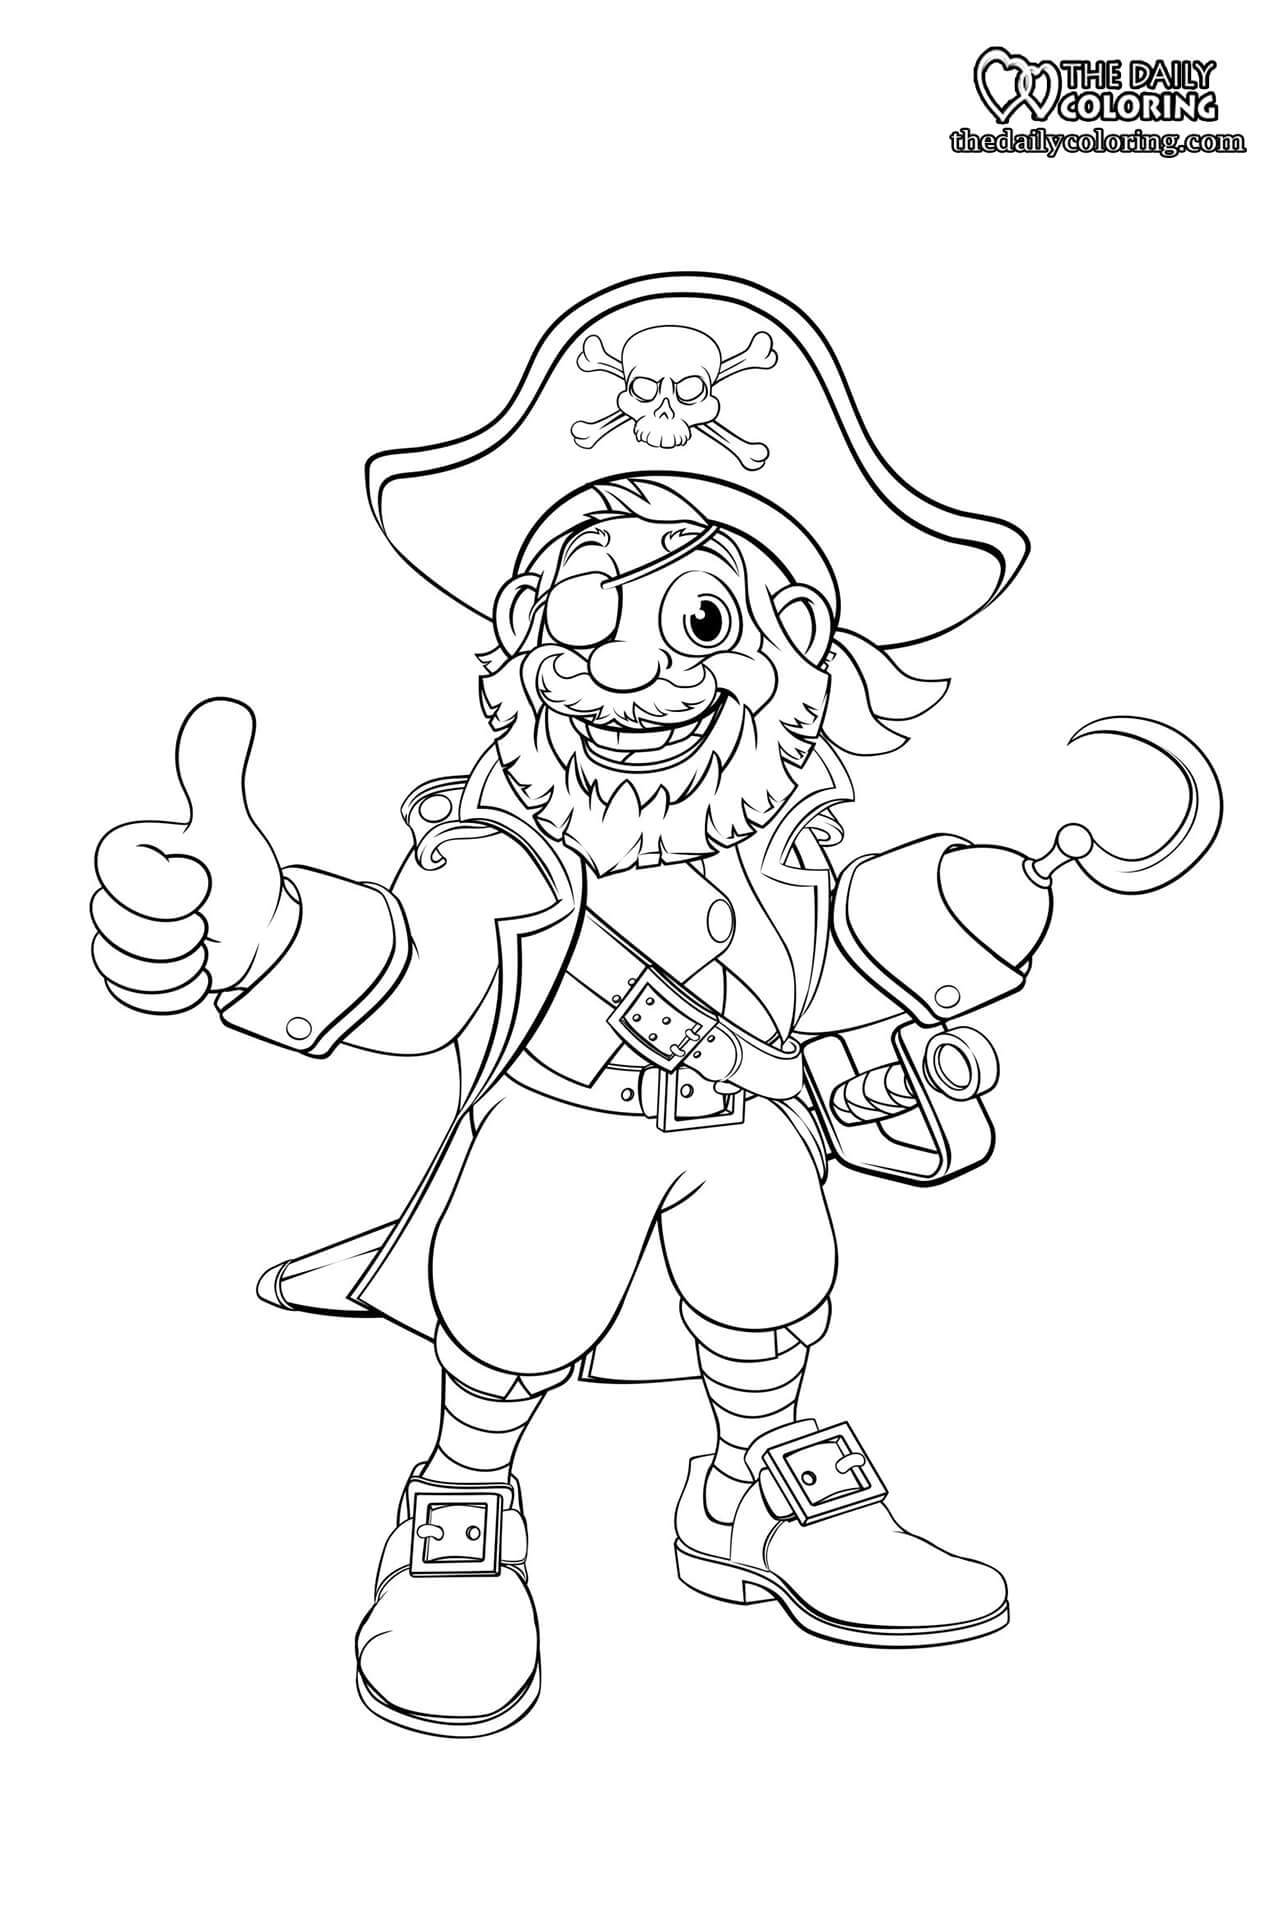 captain-pirate-coloring-page